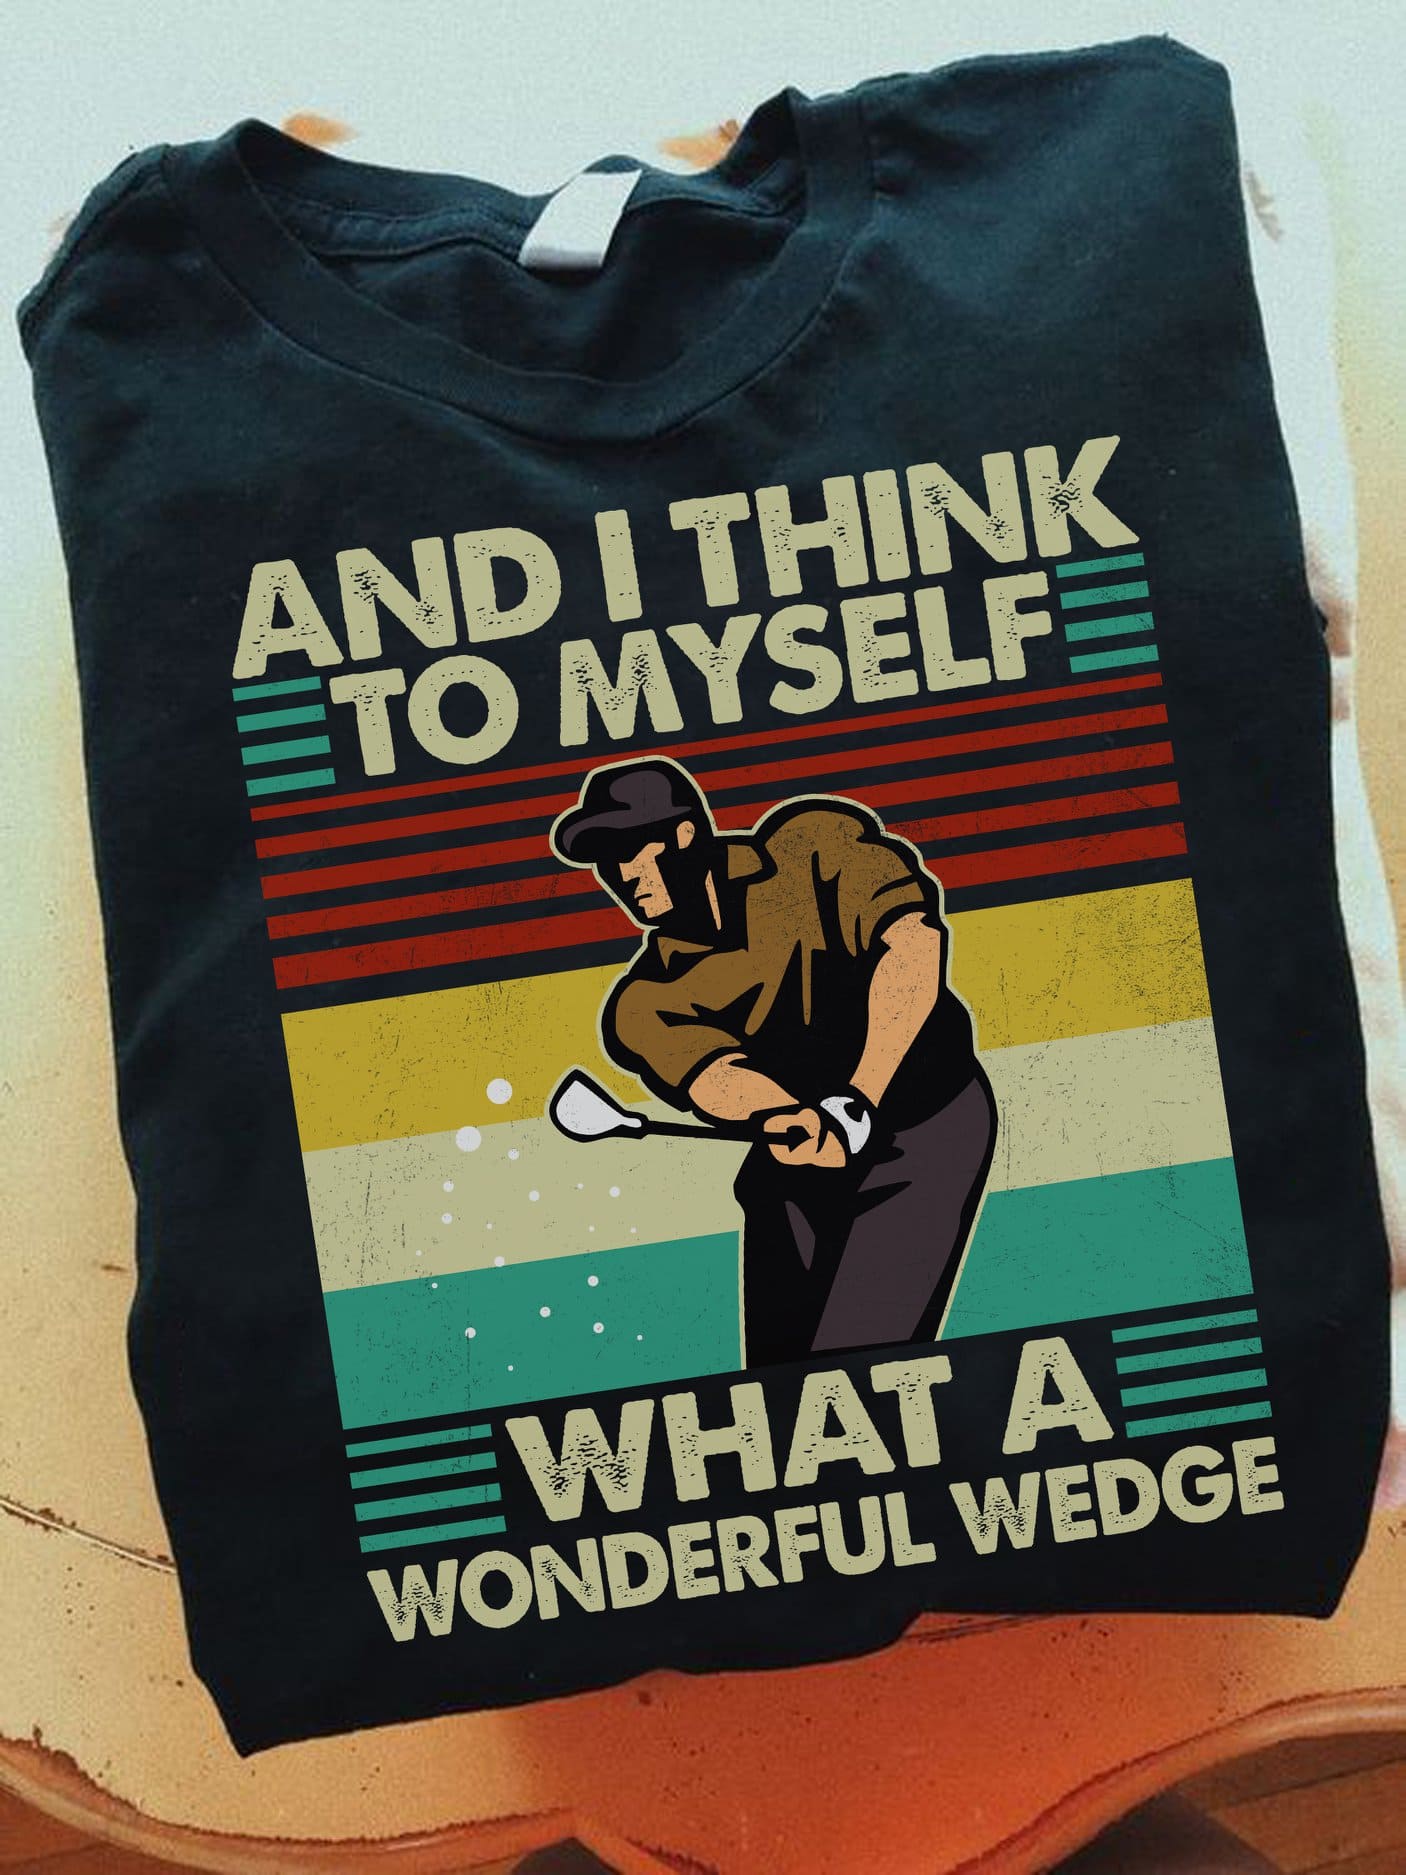 And I think to myself what a wonderful wedge - Man playing golf, T-shirt for golfers